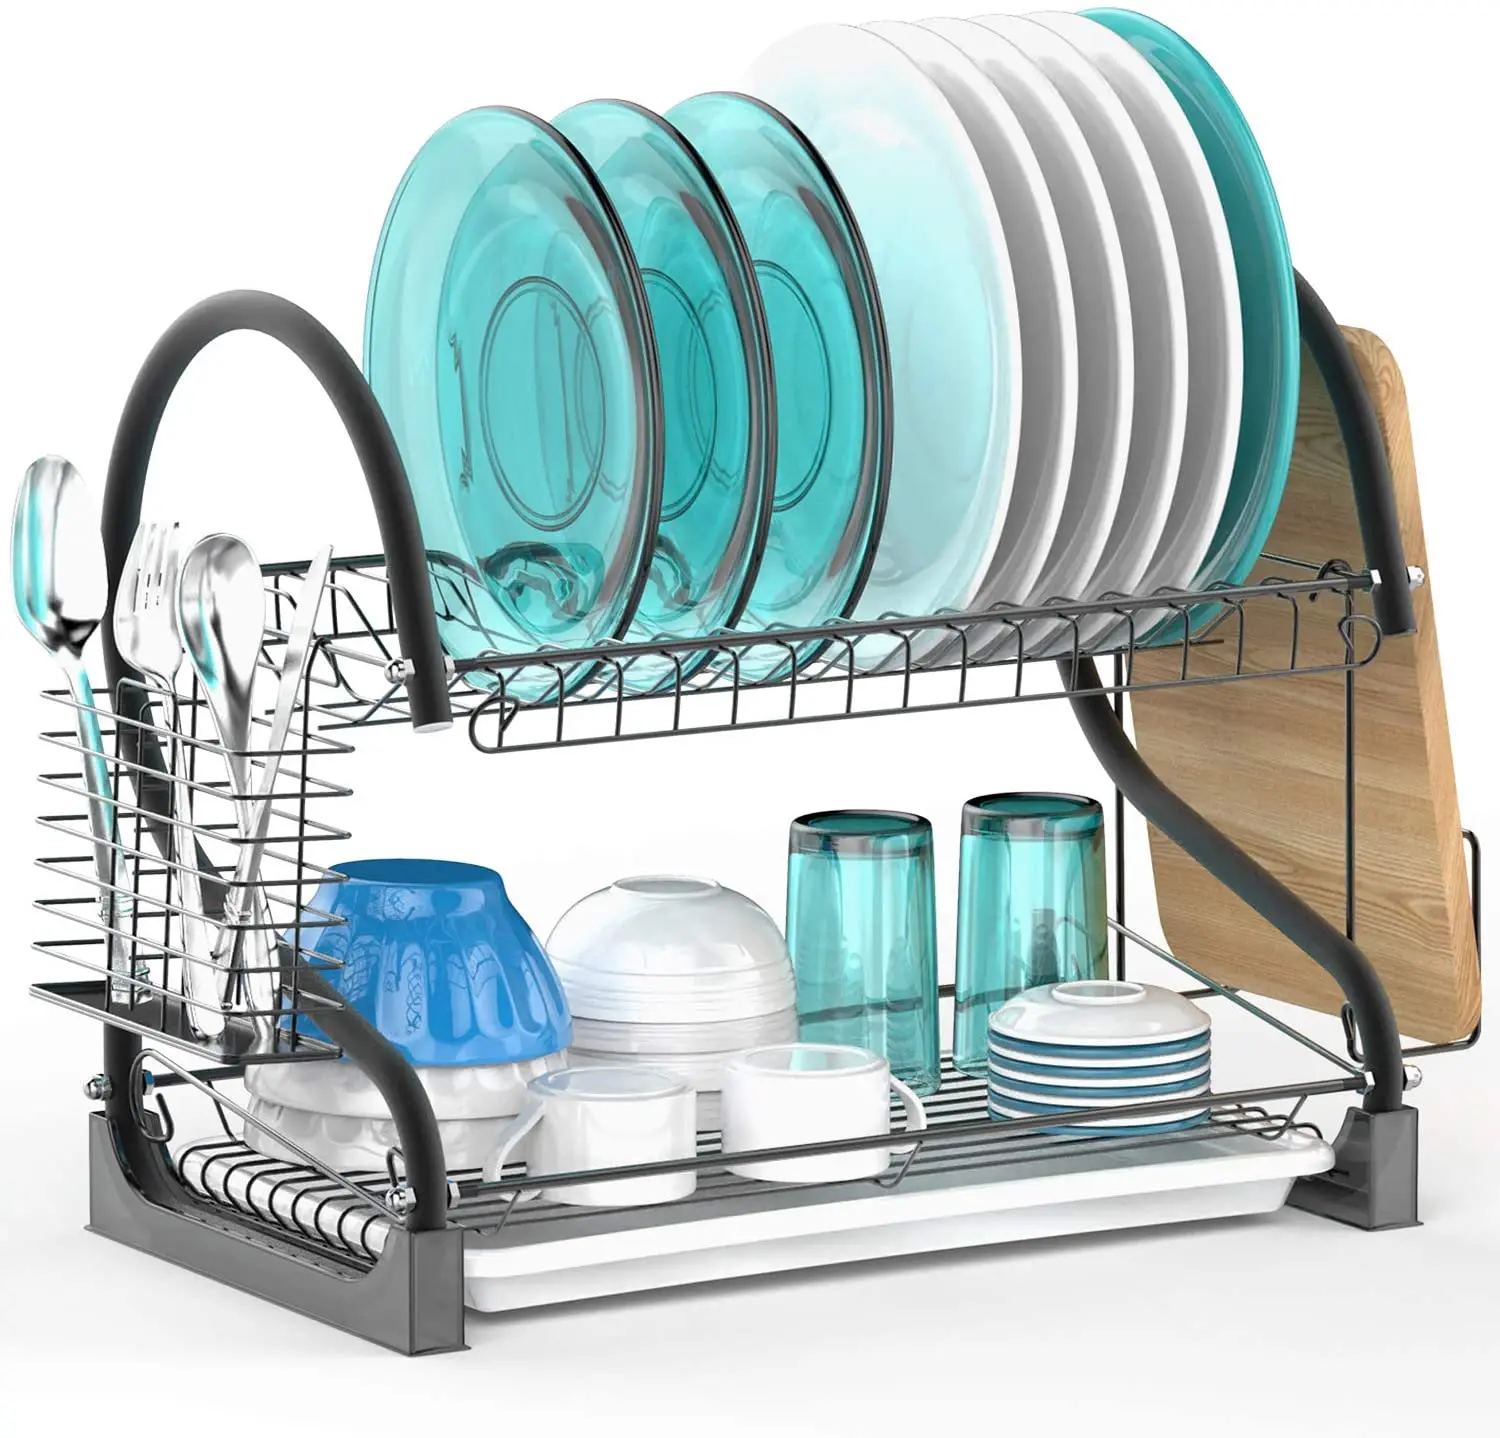 

Kitchen Metal Iron 2 Tier Dish Rack with Utensil Holder Cup Holder Dish Drainer for Kitchen Counter Top